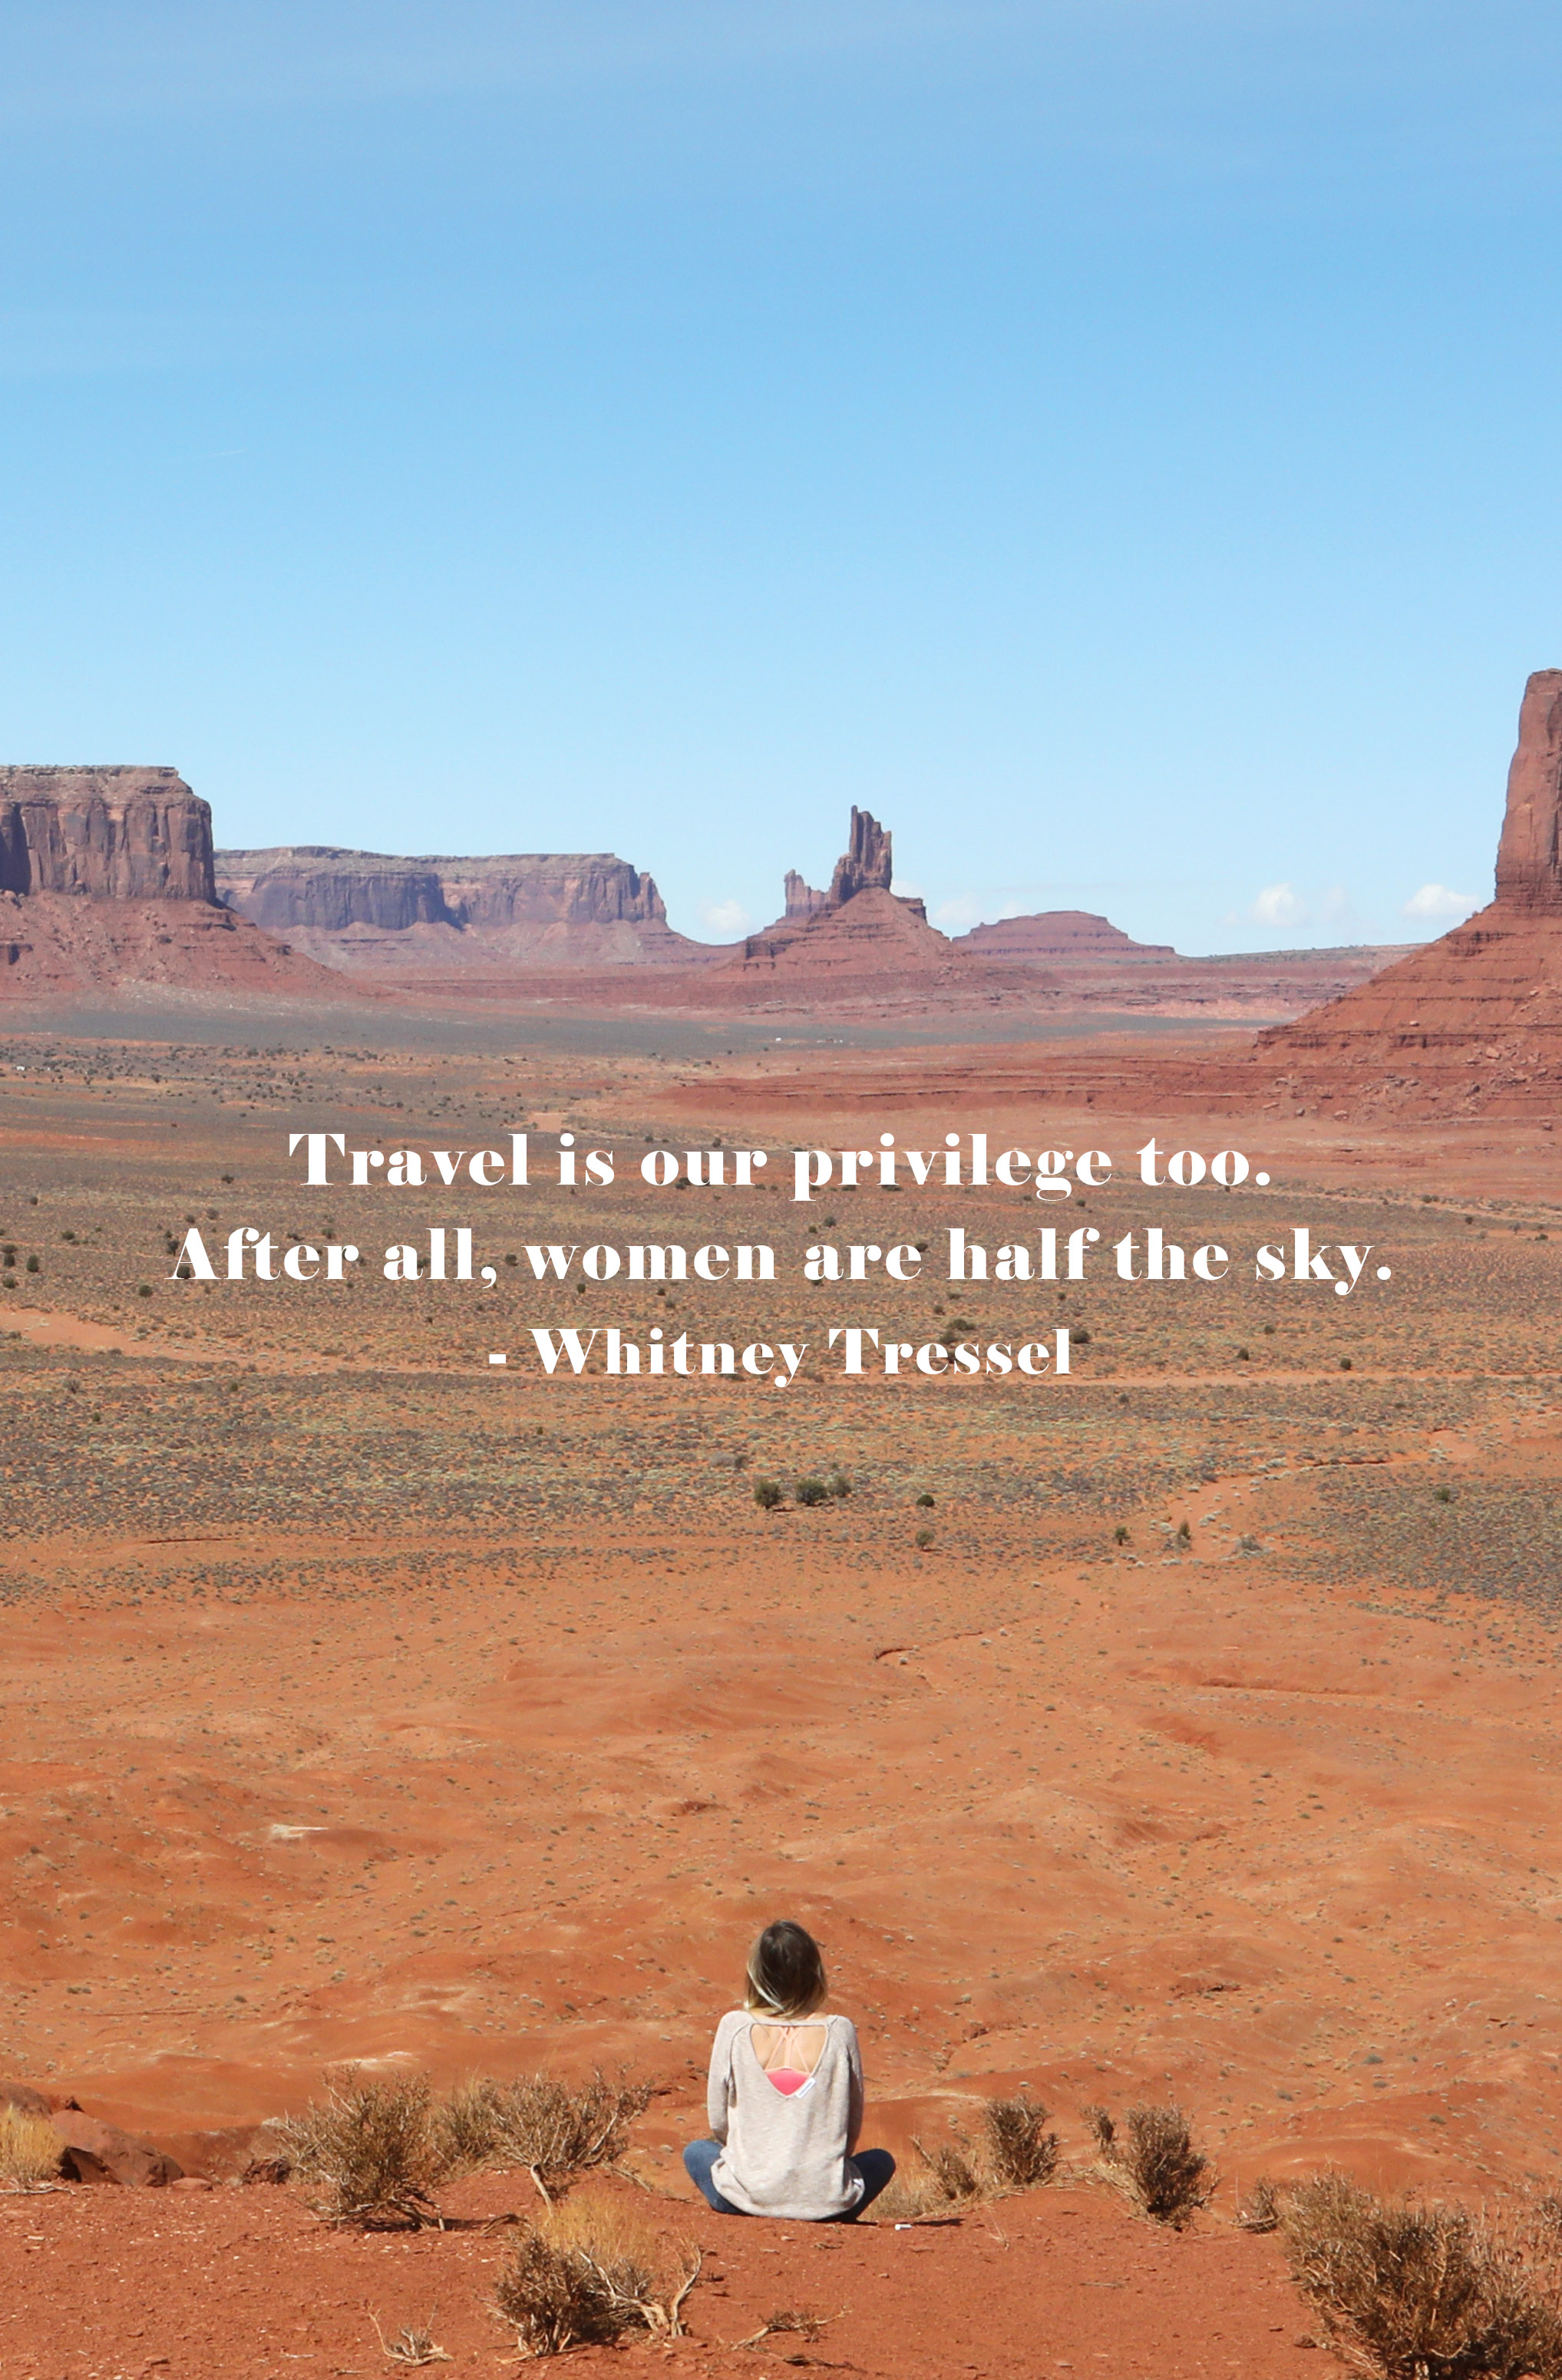 Travel is our privilege too, after all, women are half the sky.